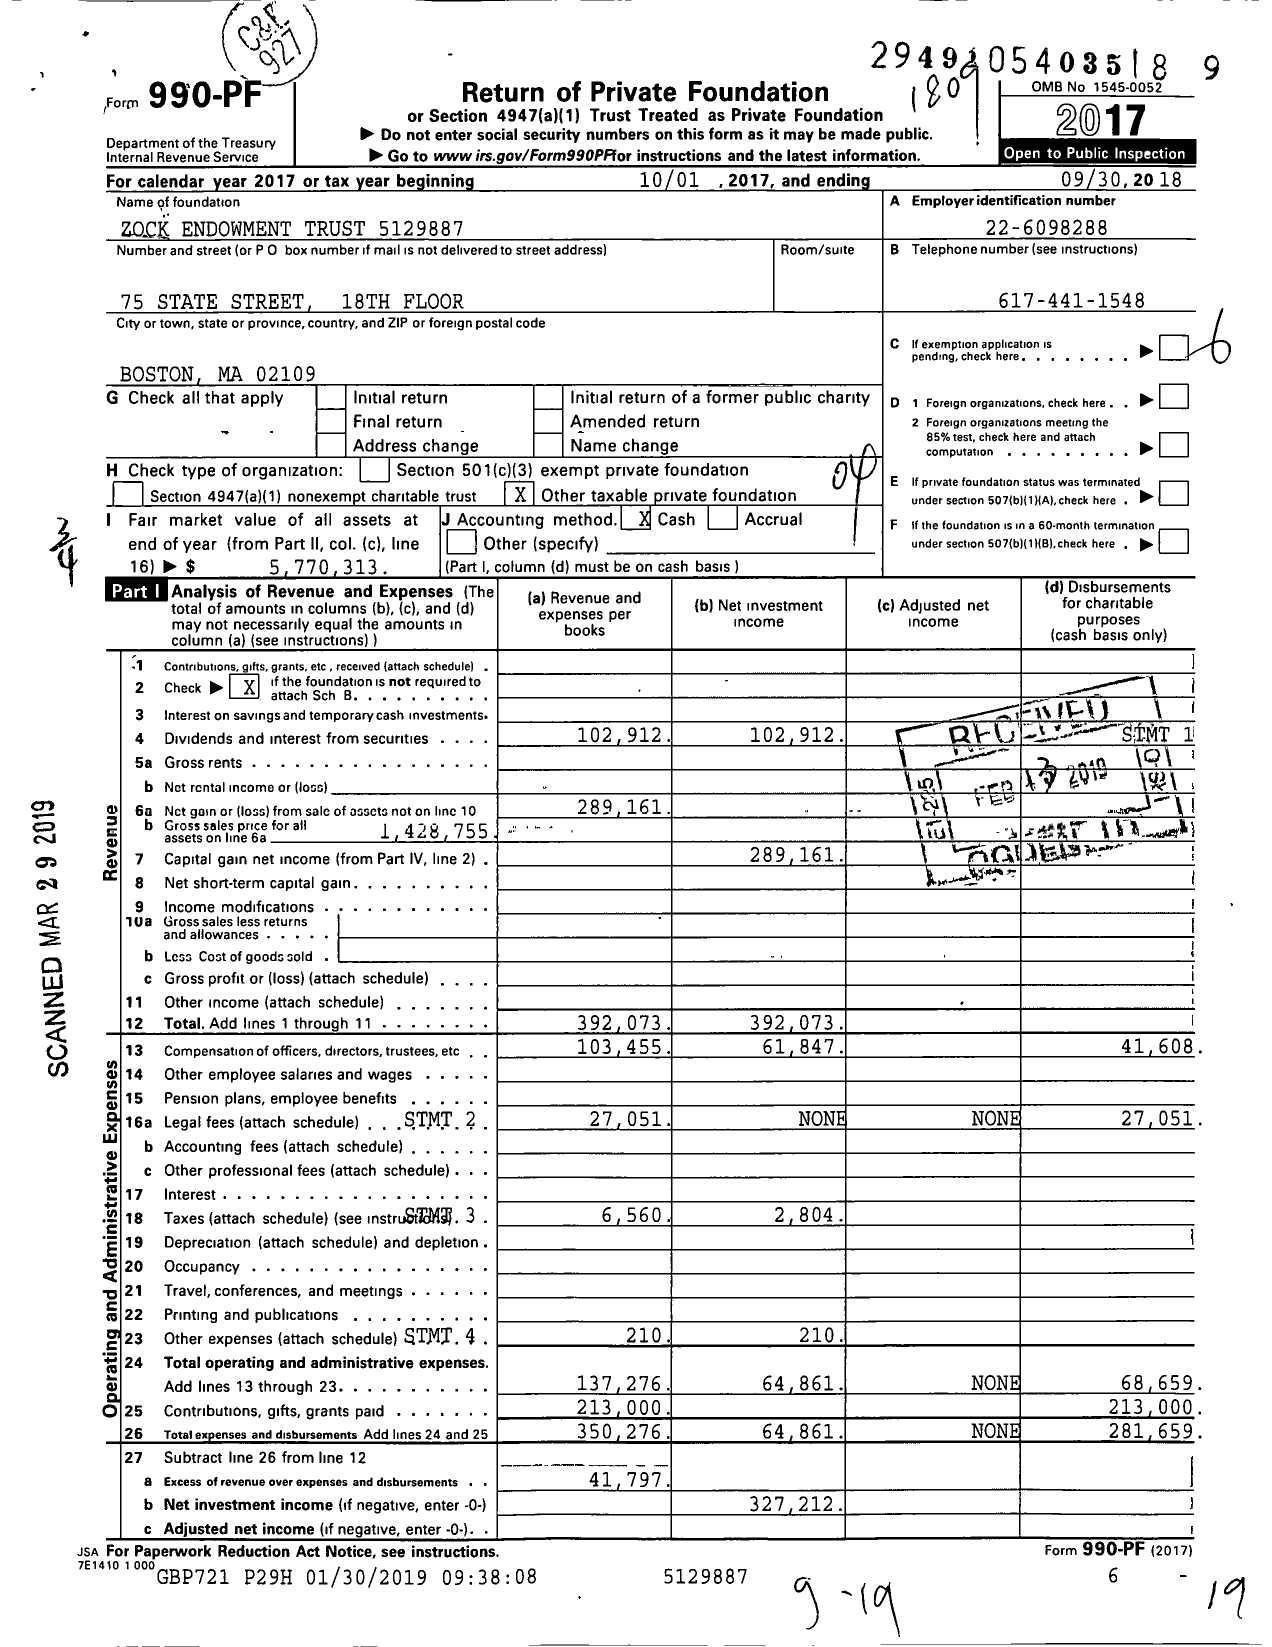 Image of first page of 2017 Form 990PF for Zock Endowment Trust 5129887